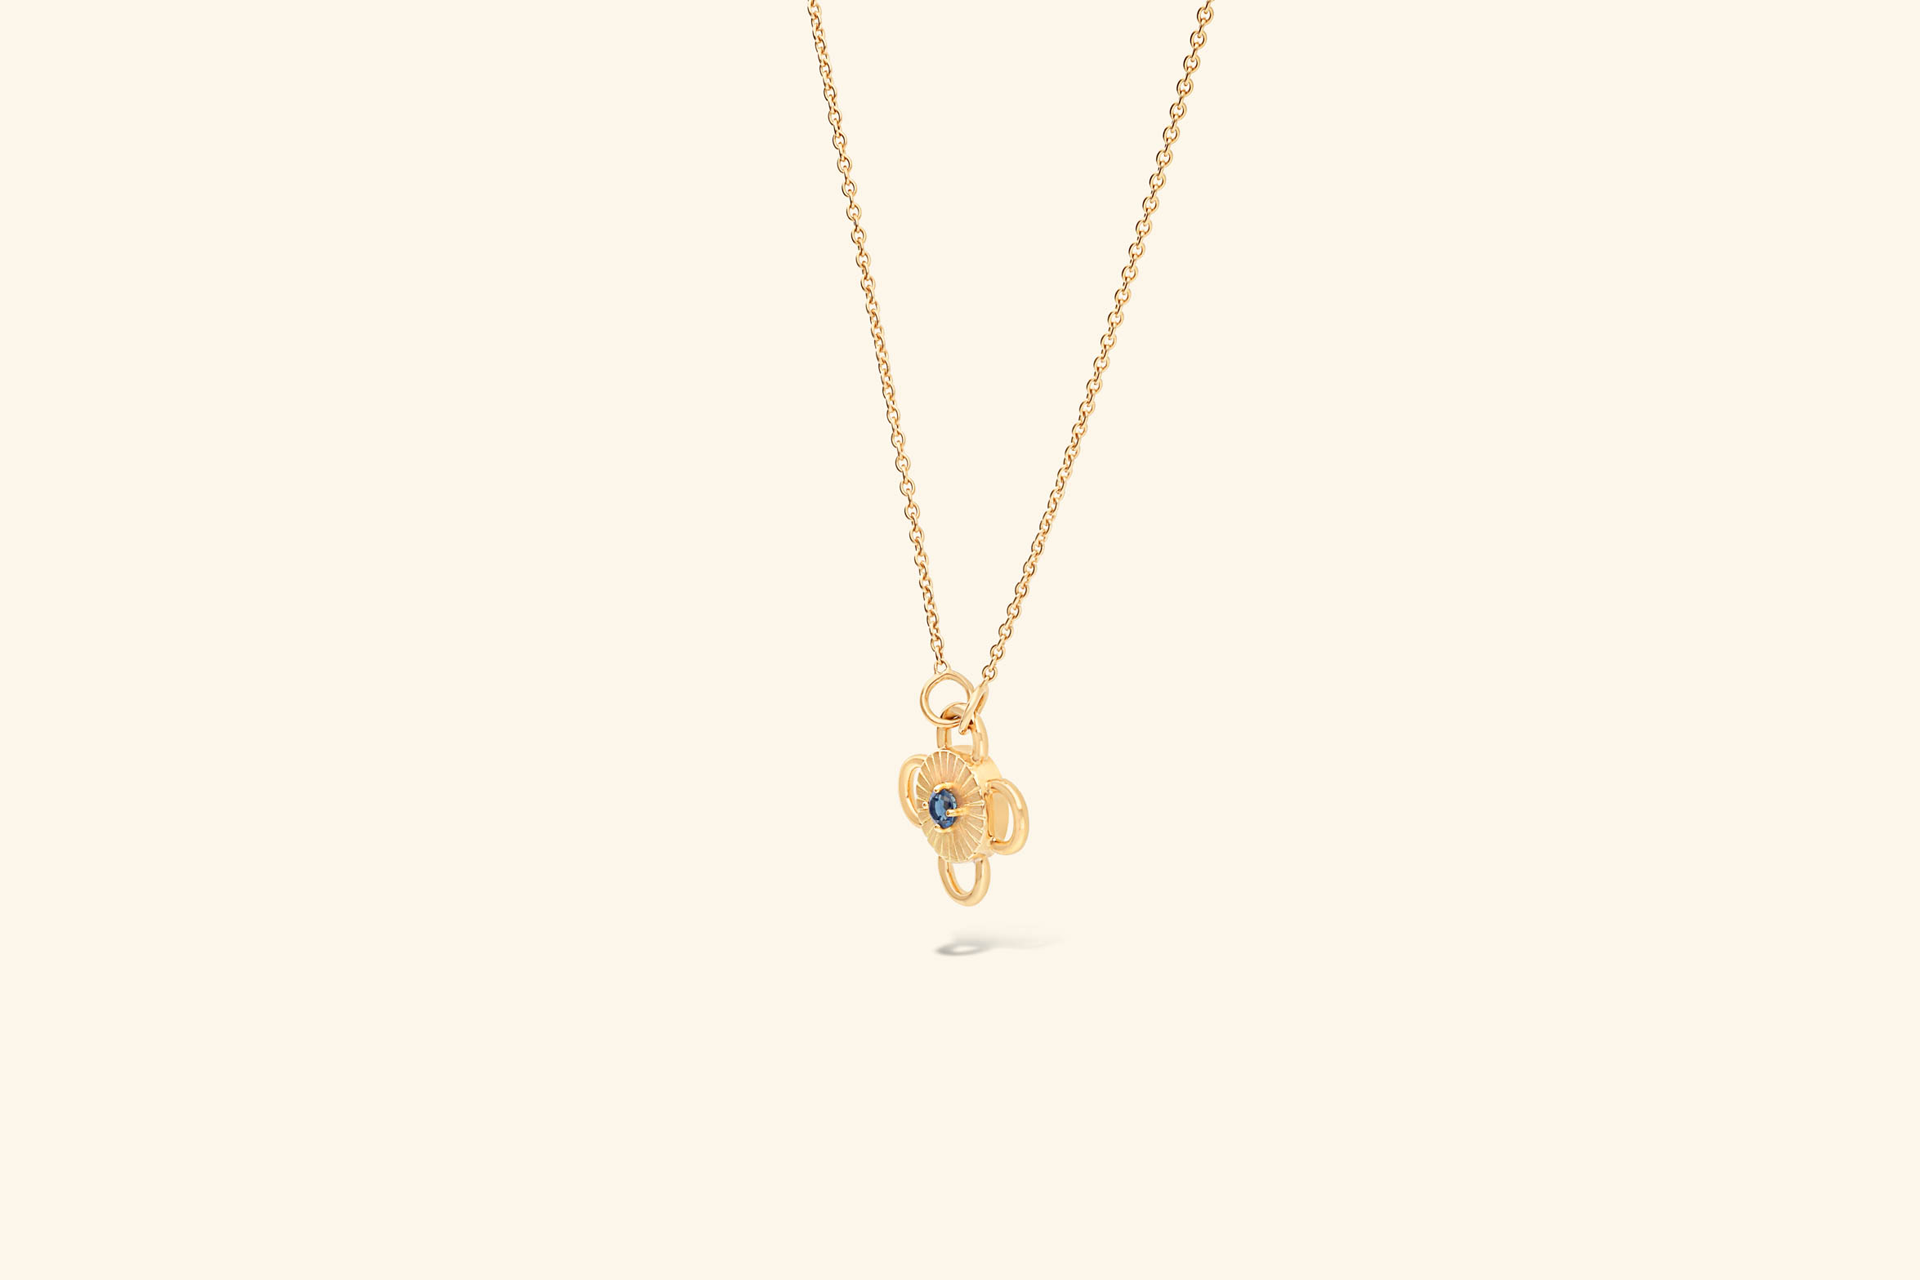 Baby Bolt Necklacea ~0.04 carat sapphire set in recycled 18k yellow gold.